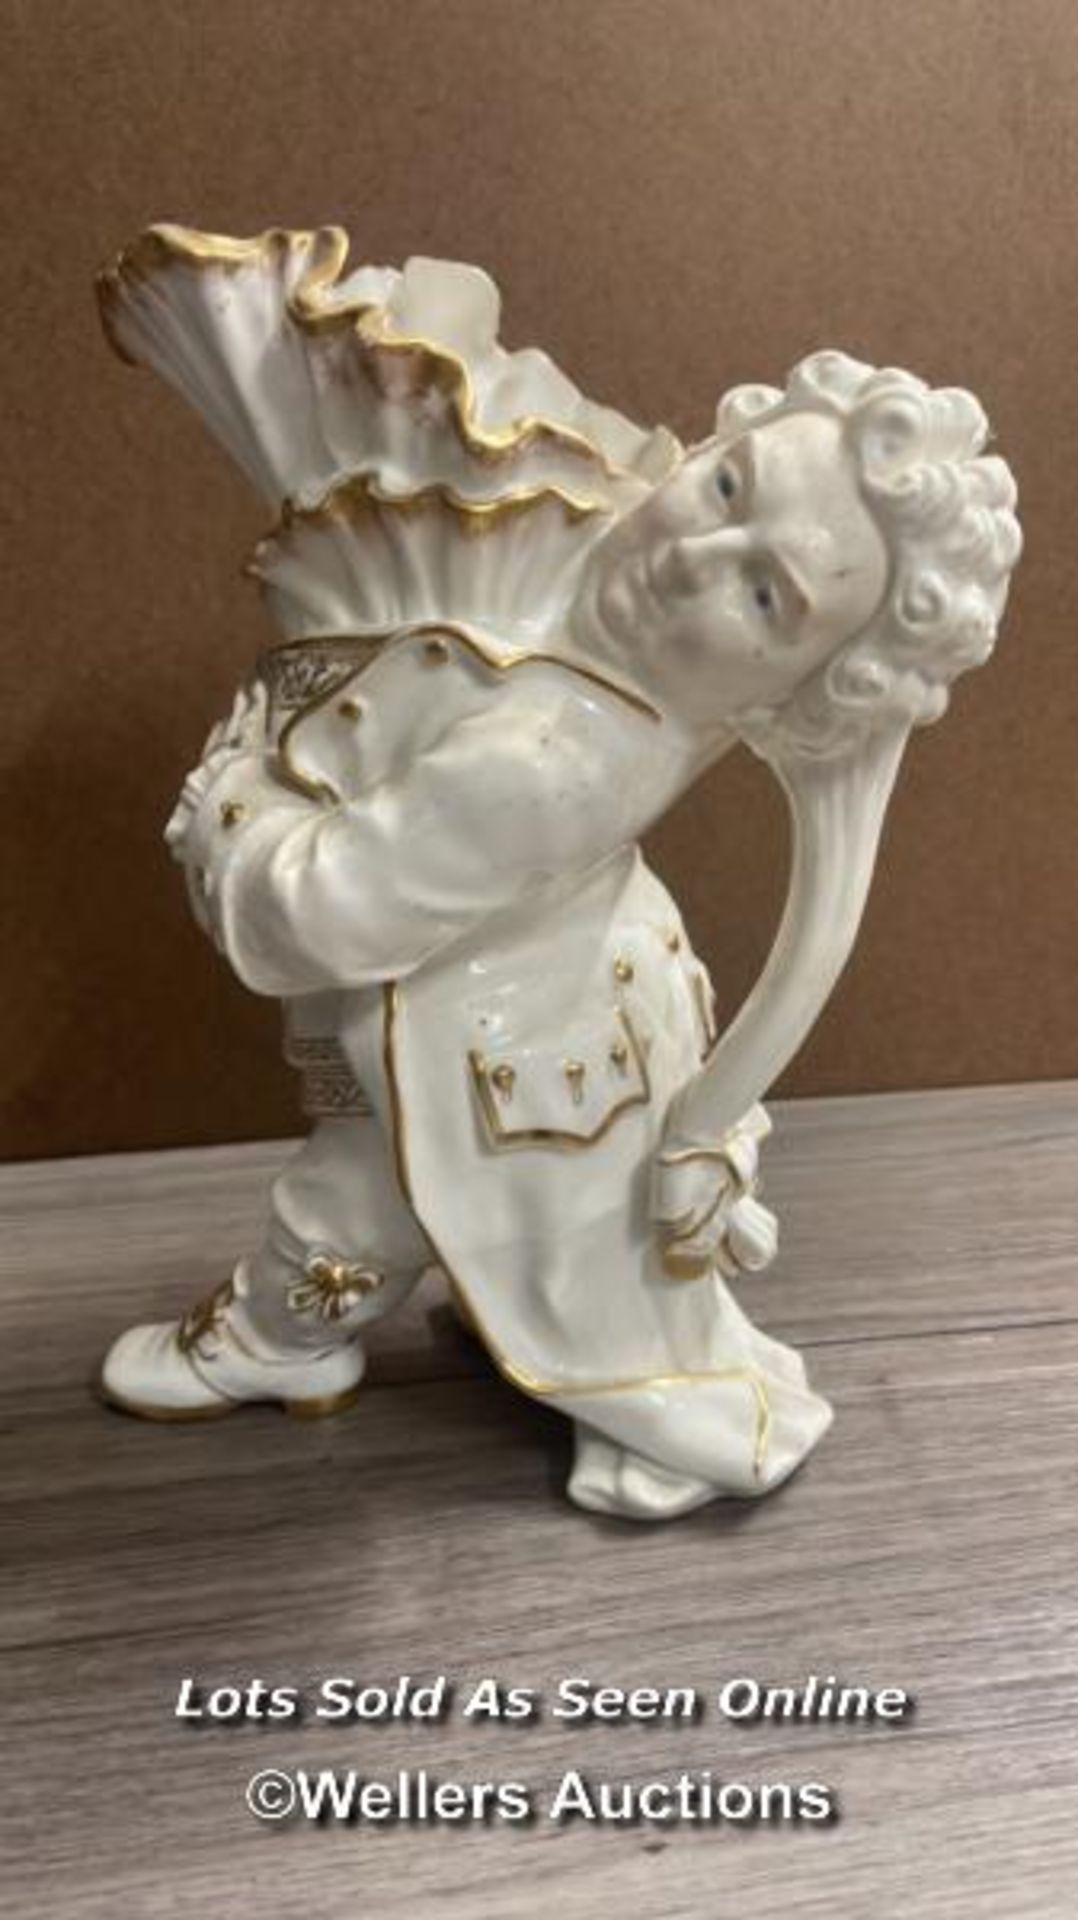 VICTORIAN GILT HEIGHTENED CHARACTER JUG MODELLED AS A PORTLY MAN WITH FRILLED SHIRT; BLUE GLAZE - Image 5 of 9